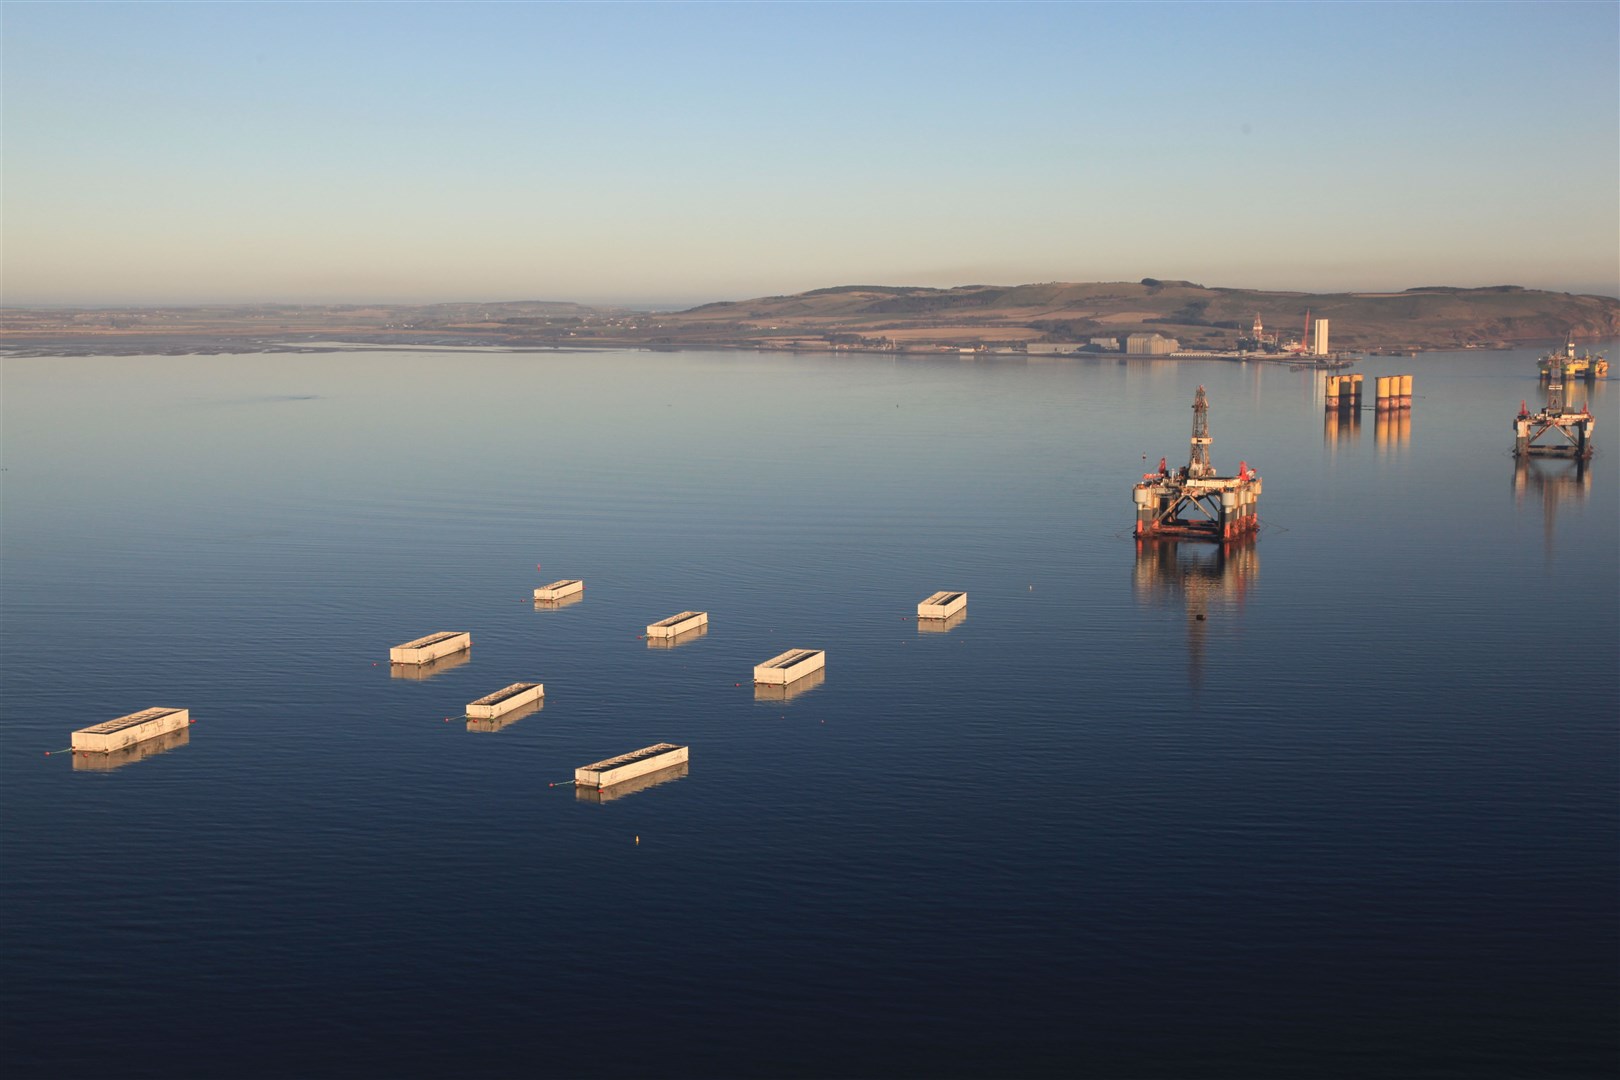 The concrete caissons in the Cromarty Firth.